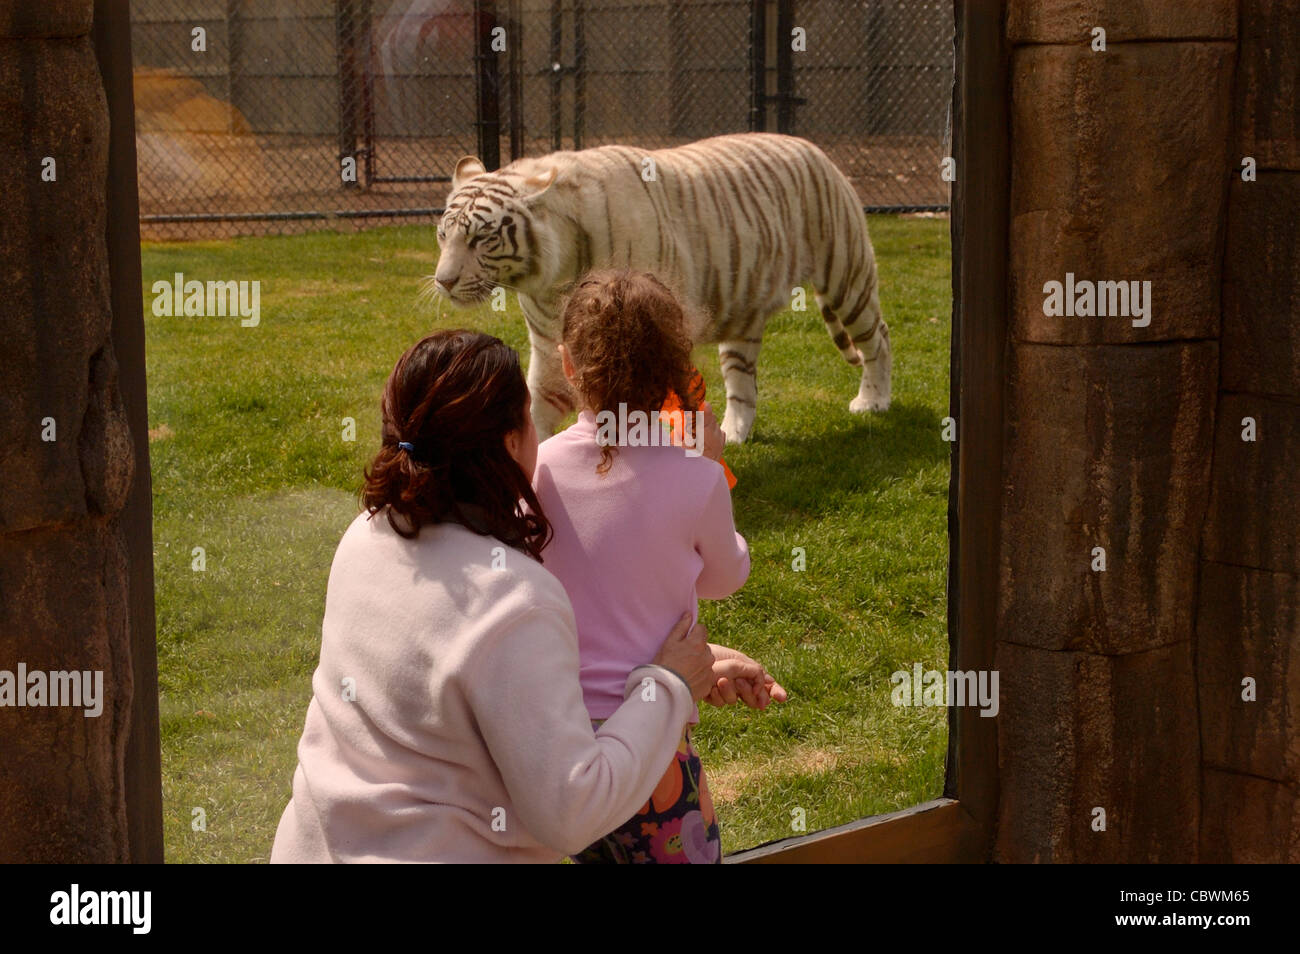 Mother and little girl watching a tiger at the zoo through protective glass window. Stock Photo